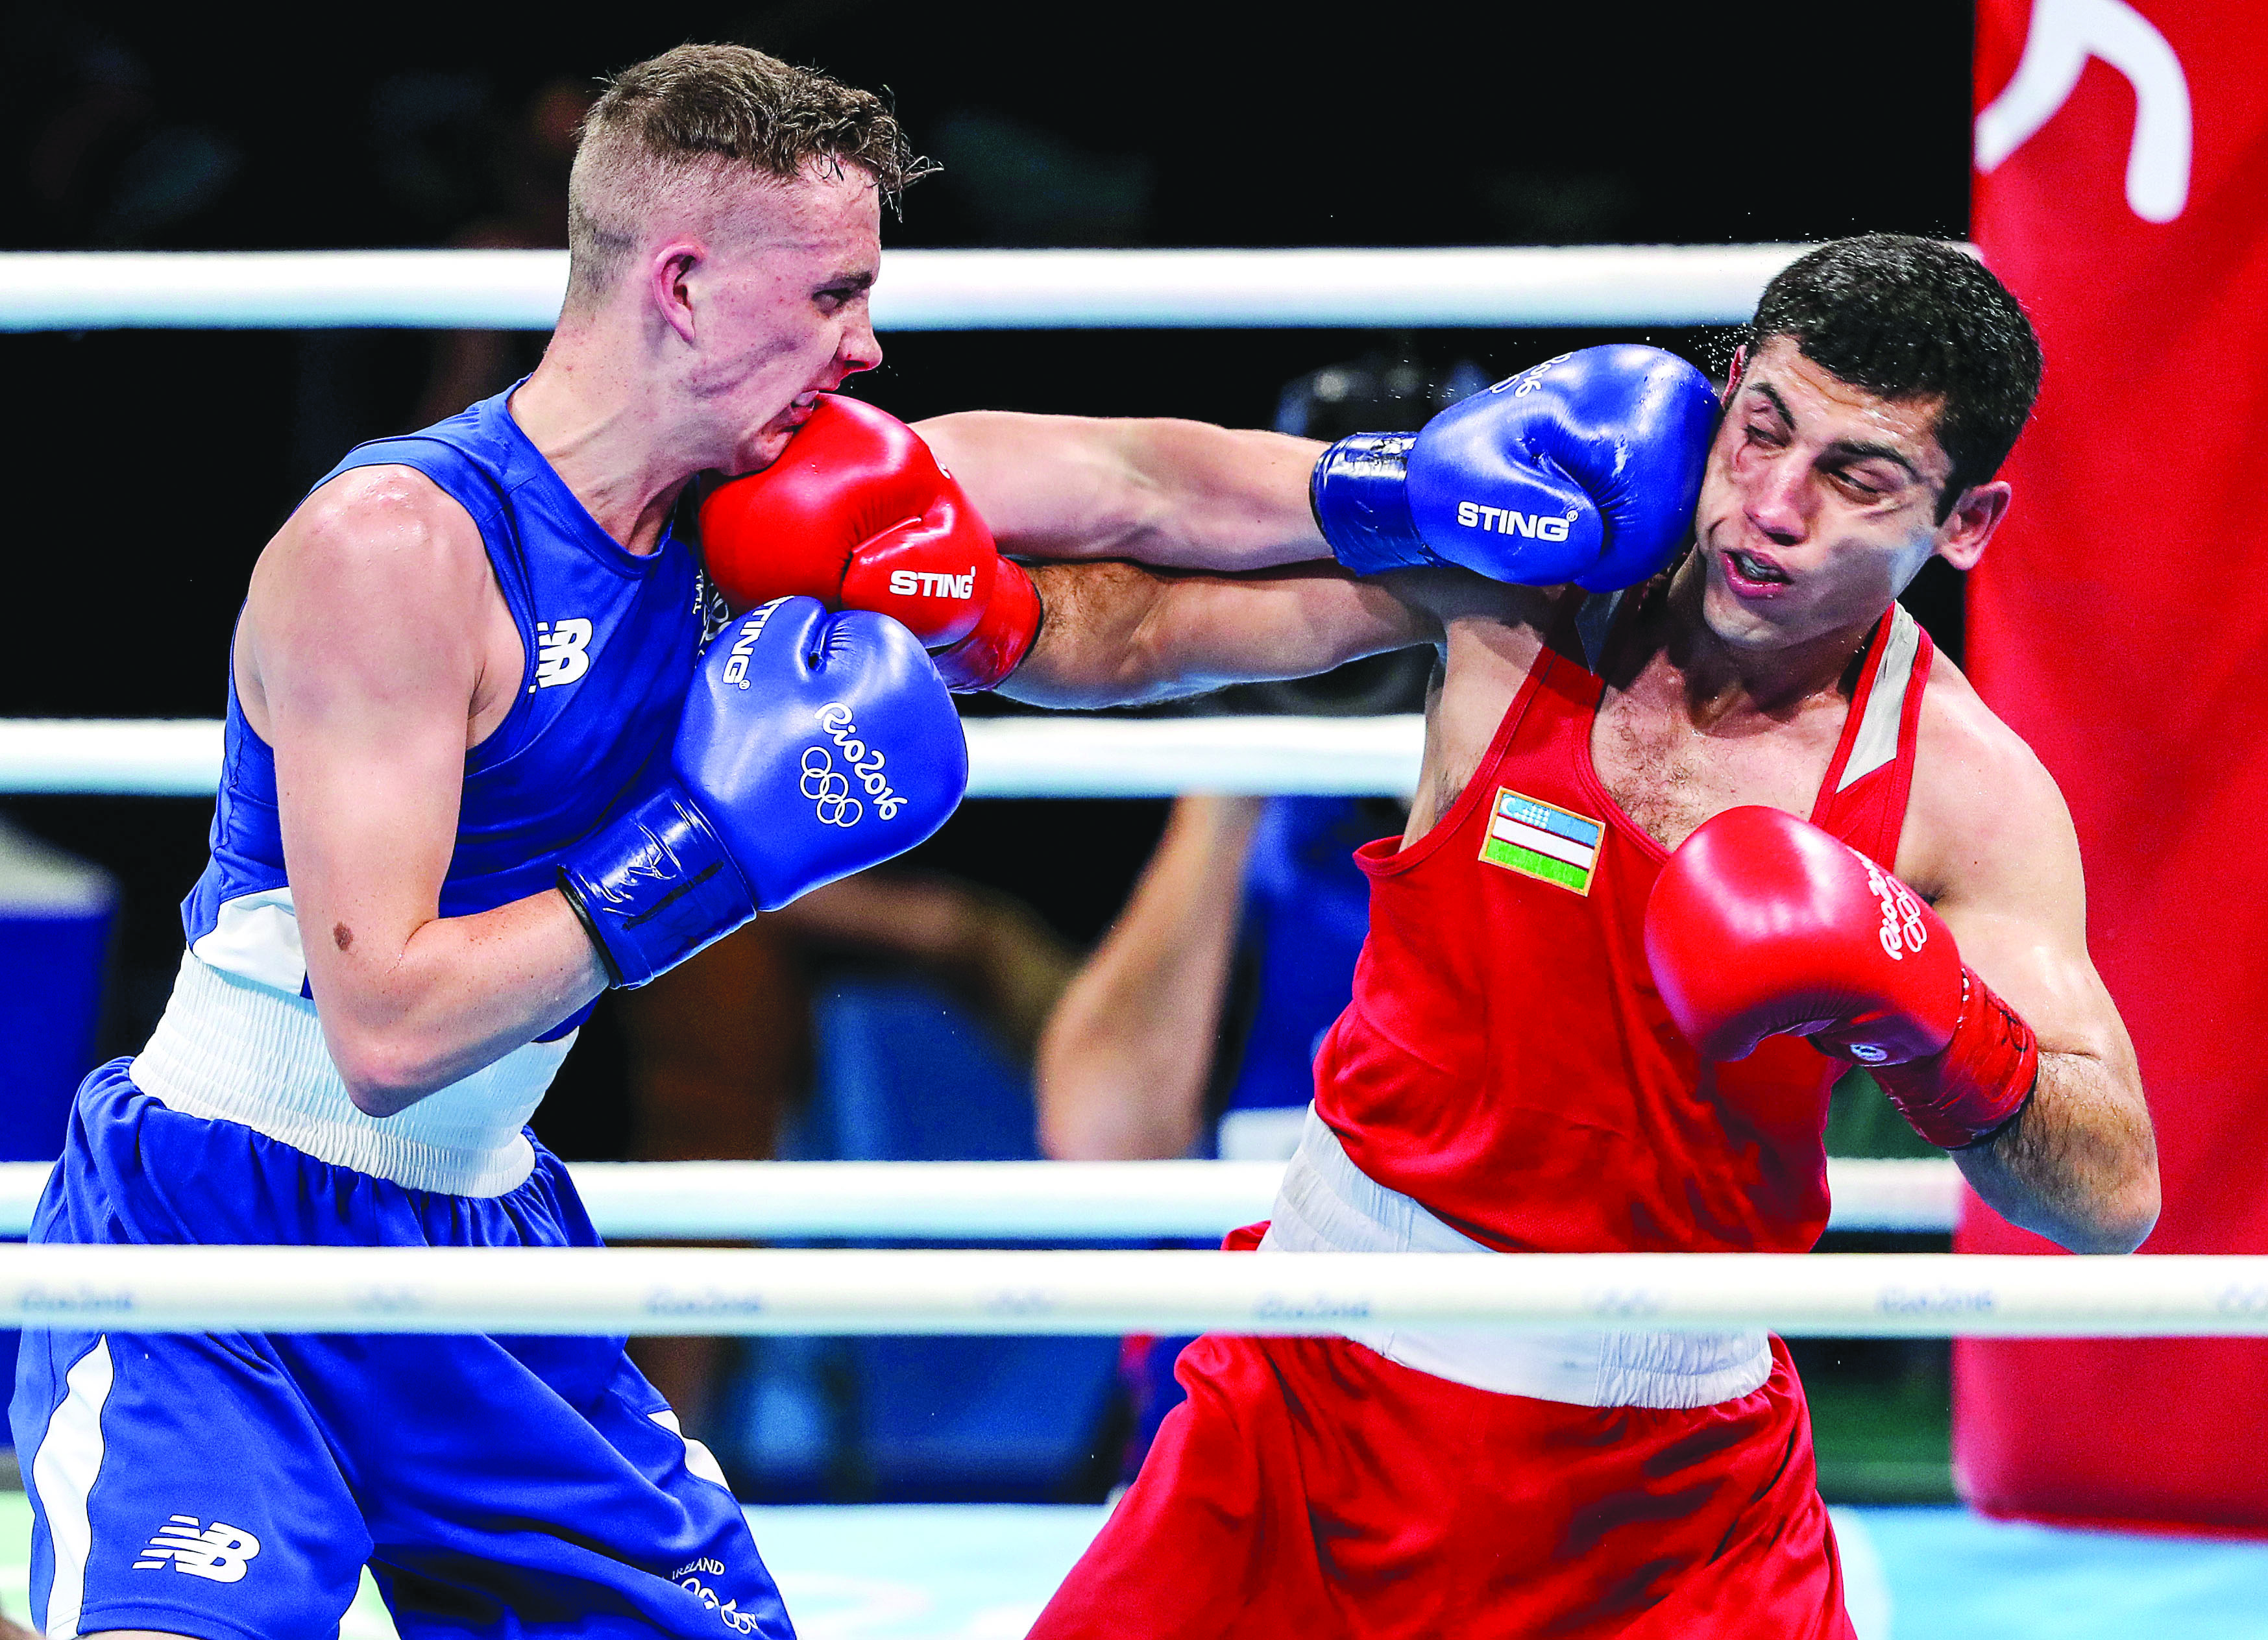 Brendan Irvine lost out to eventual gold medallist Shakhobidin Zoirovin in his opening flyweight bout